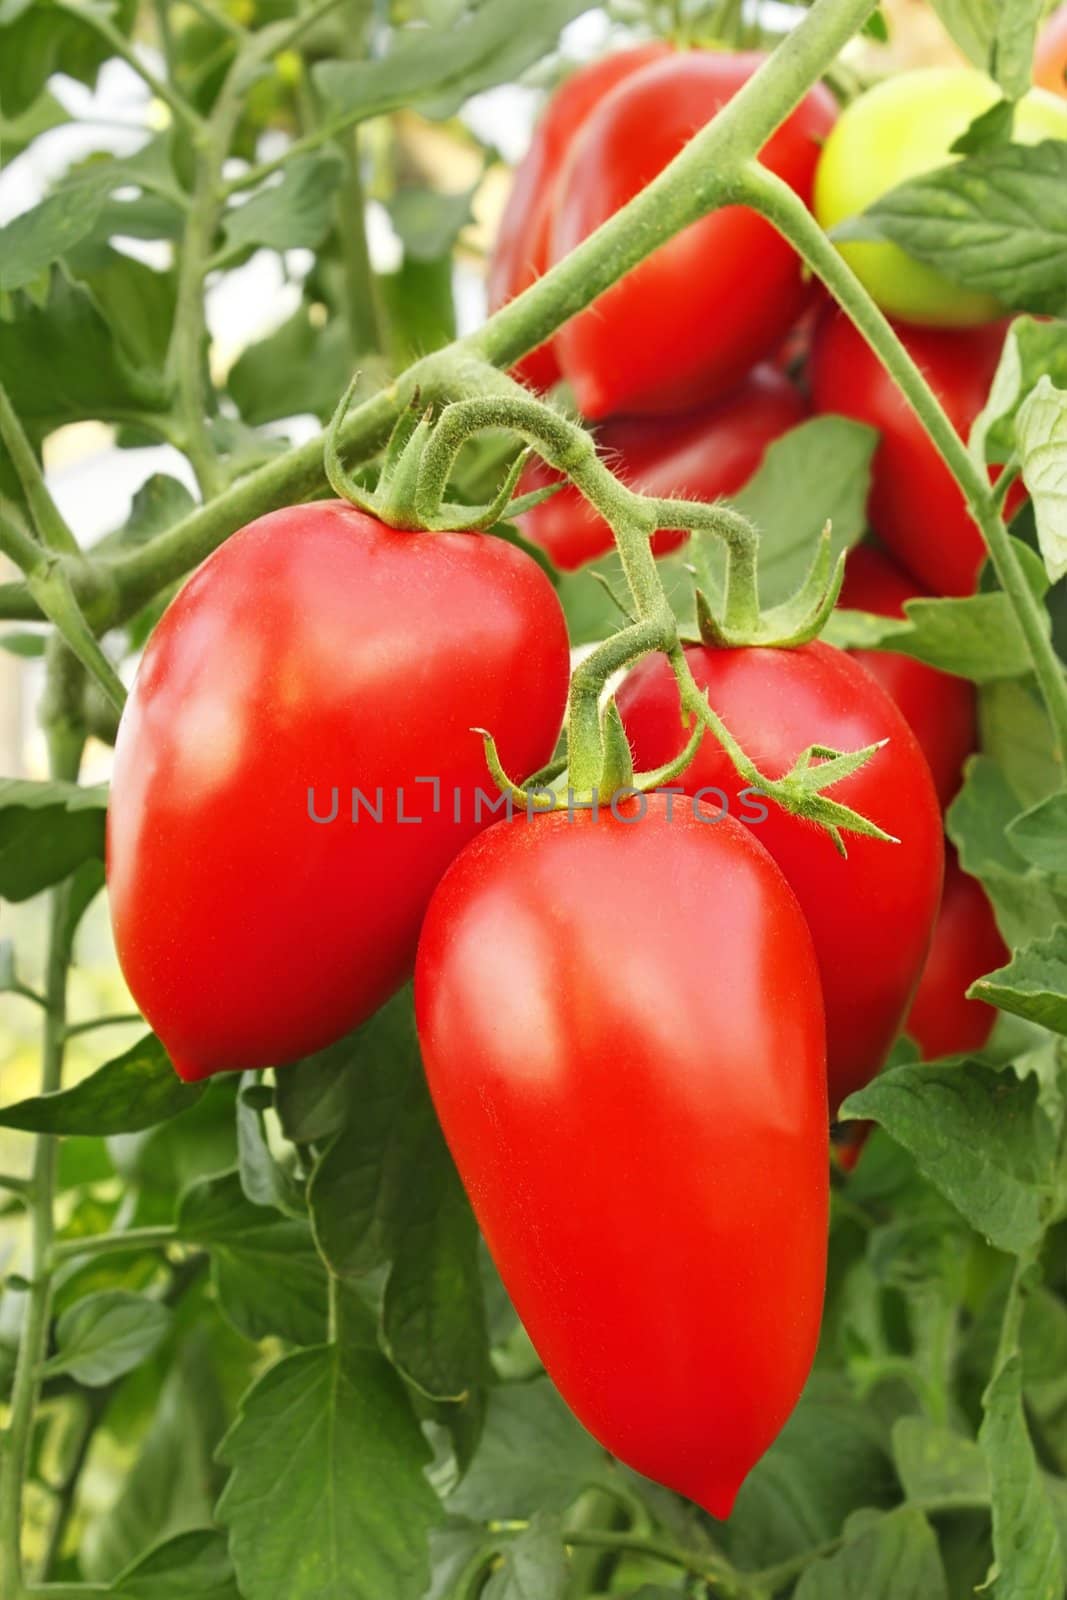 Bunch with elongated ripe red tomatoes in greenhouse